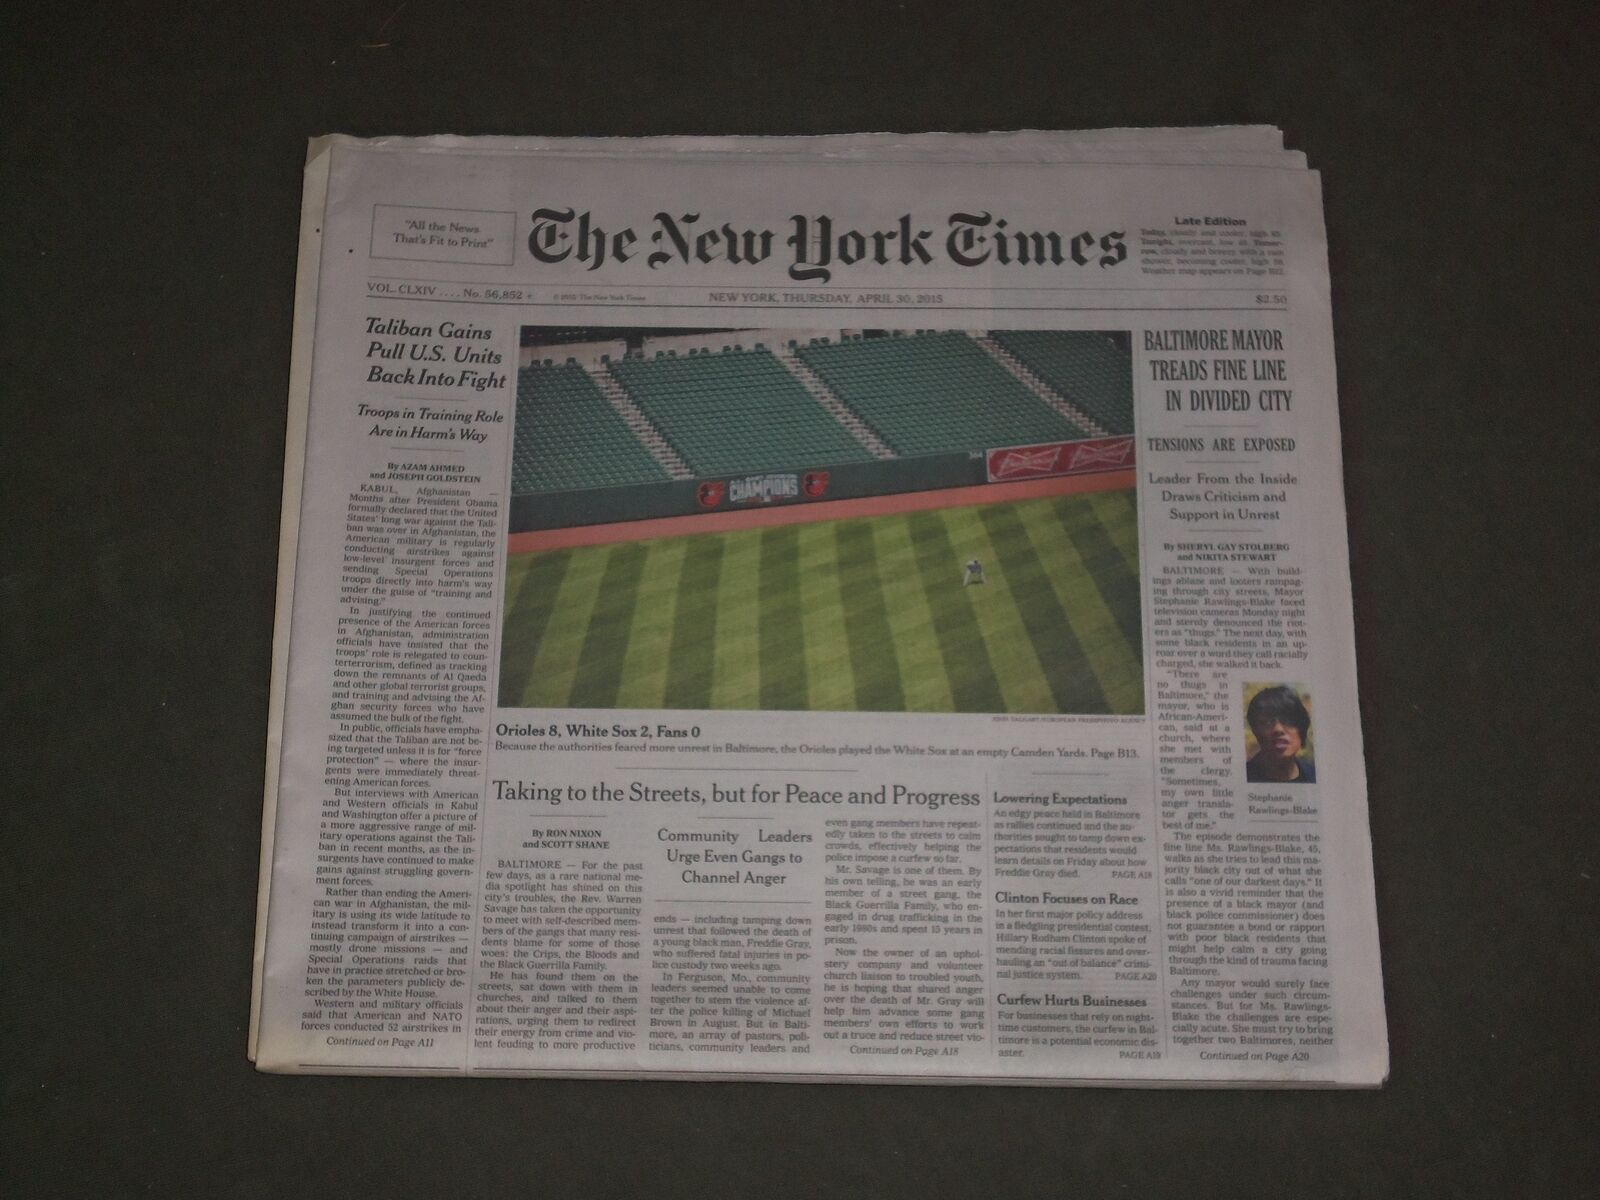 2015 APRIL 30 NEW YORK TIMES - NO FANS AT ORIOLES GAME - UNREST IN BALTIMORE